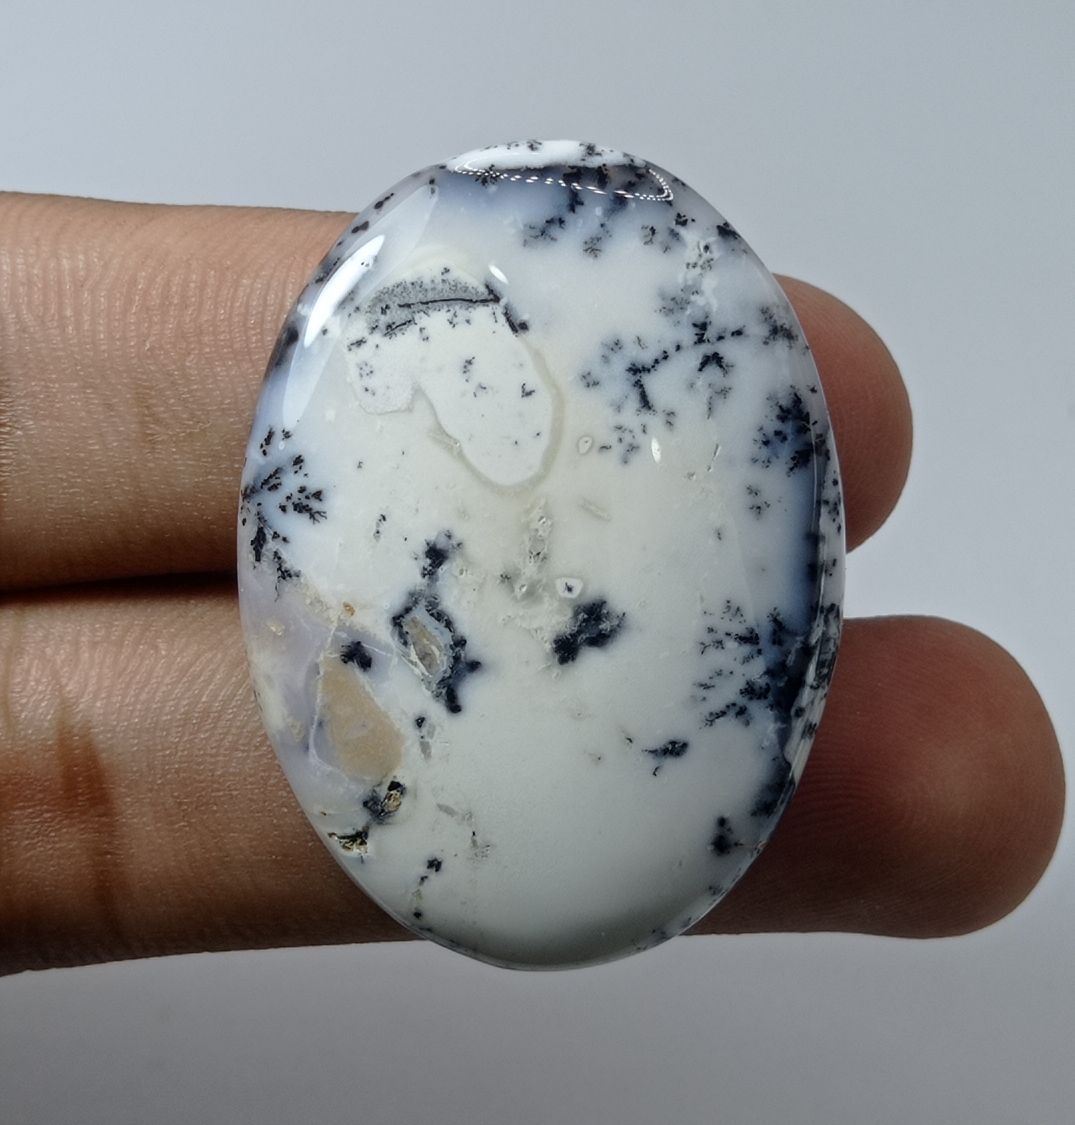 54.8ct Opal for Sale - Natural Dendritic Opal - October Birthstone - 42x31mm